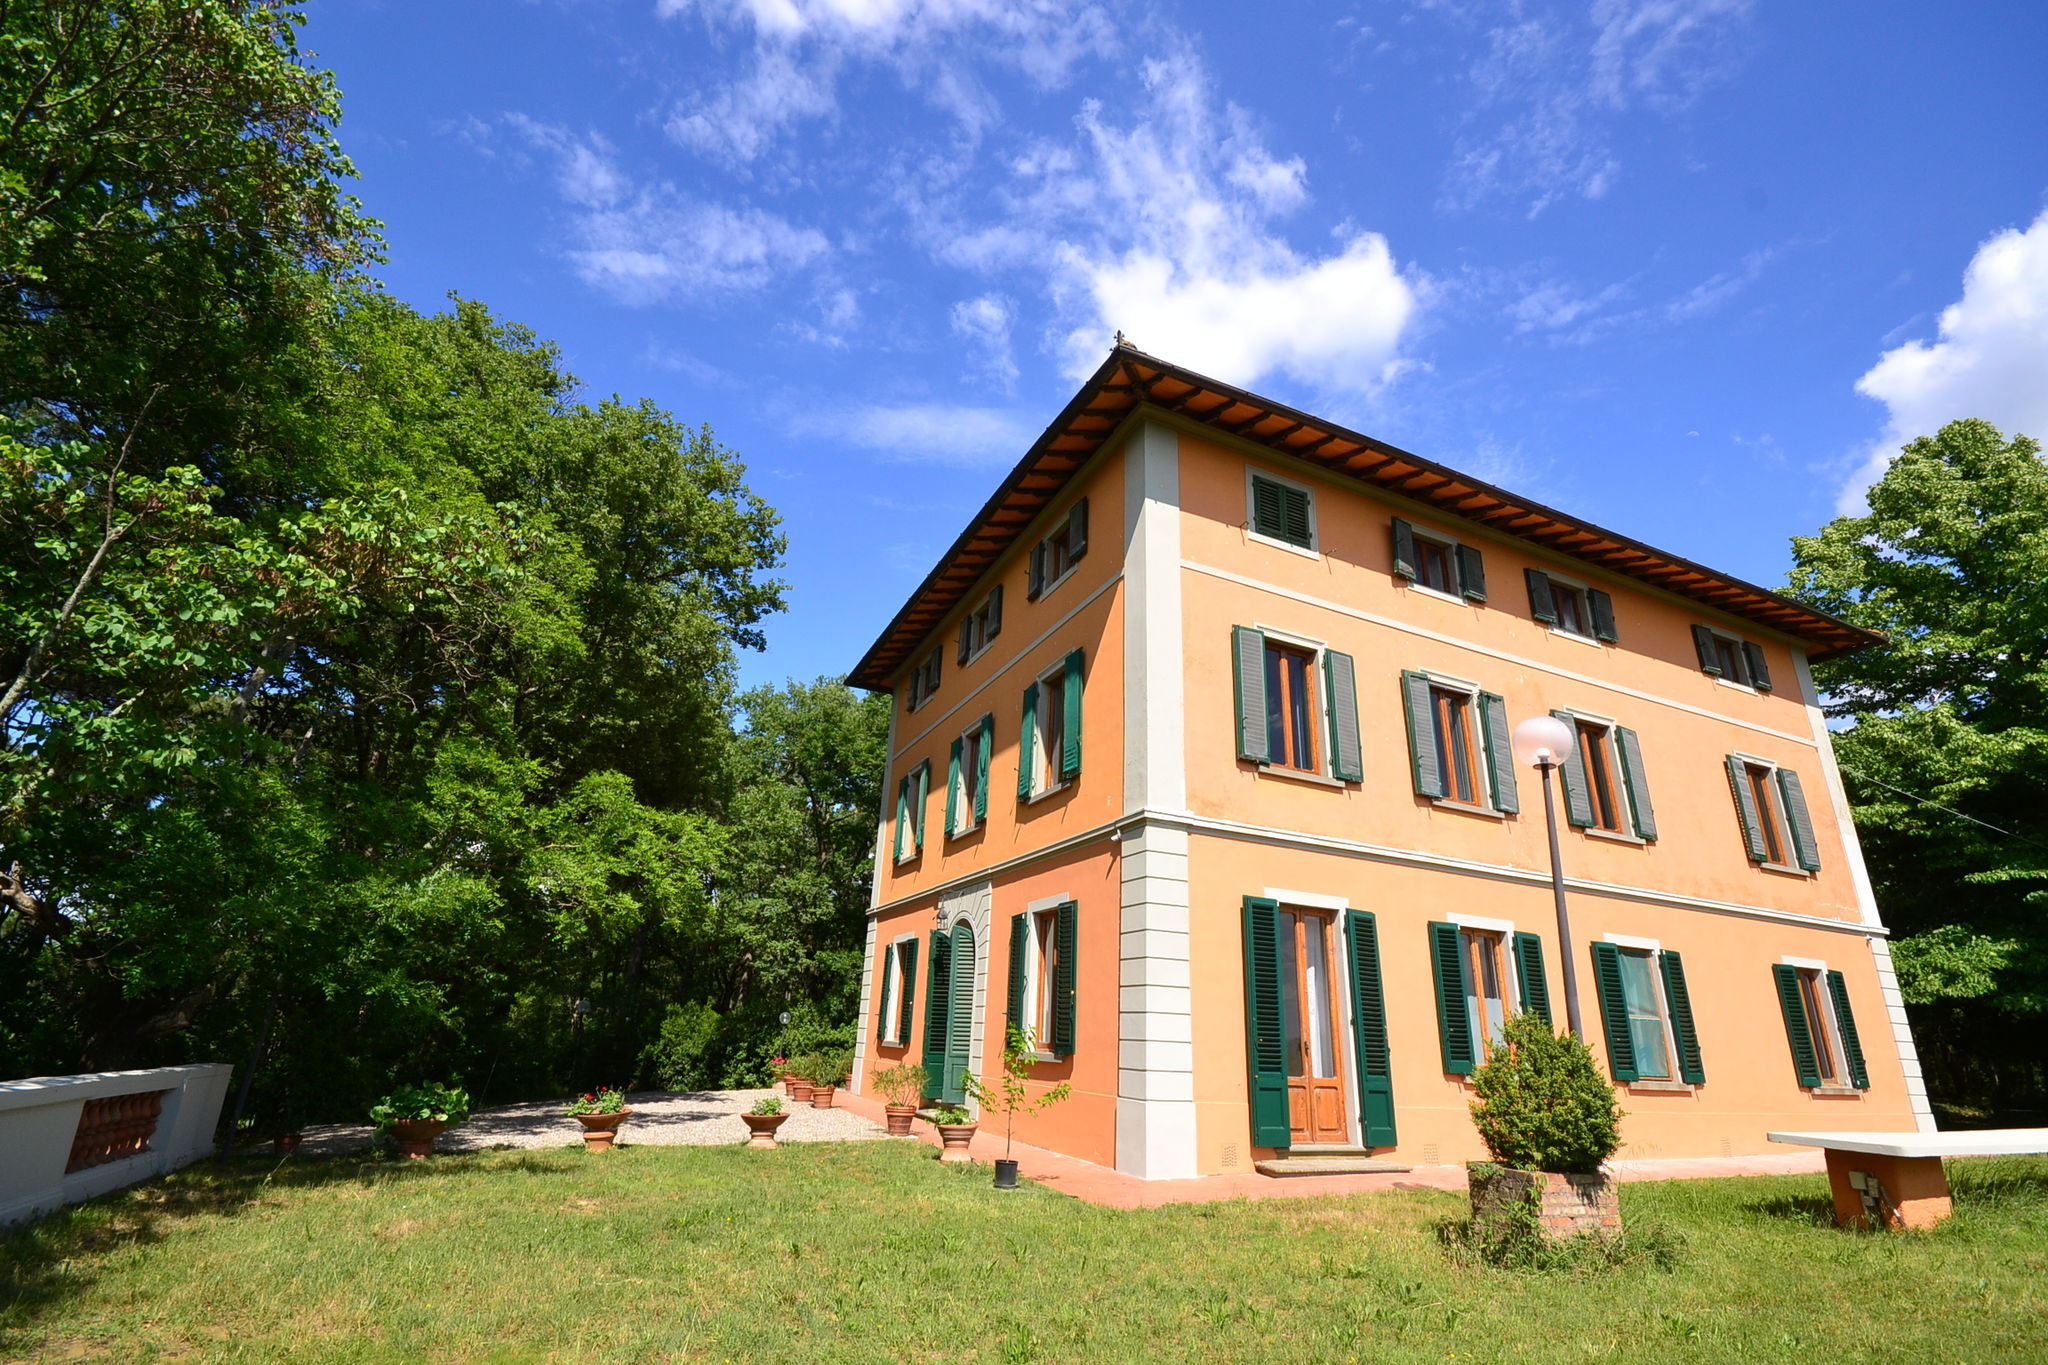 Part of a beautiful manor house overlooking the hills of Chianti Classico